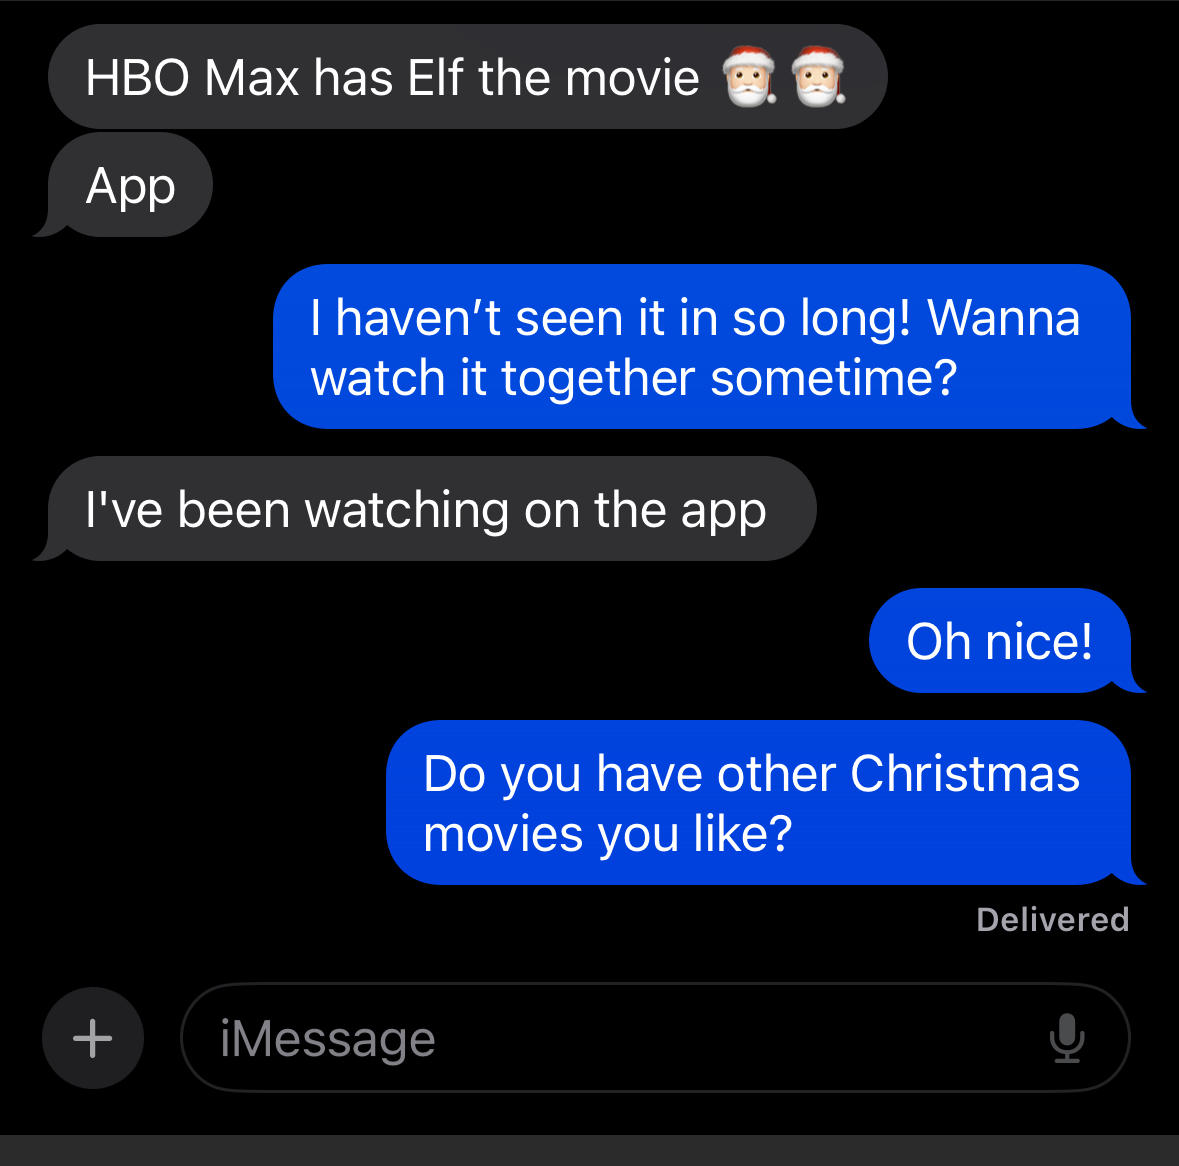 HBO Max has Elf the movie
App
I haven't seen it in so long! Wanna watch it together sometime?
I've been watching on the app
Oh nice!
Do you have other Christmas movies you like?
Delivered
iMessage